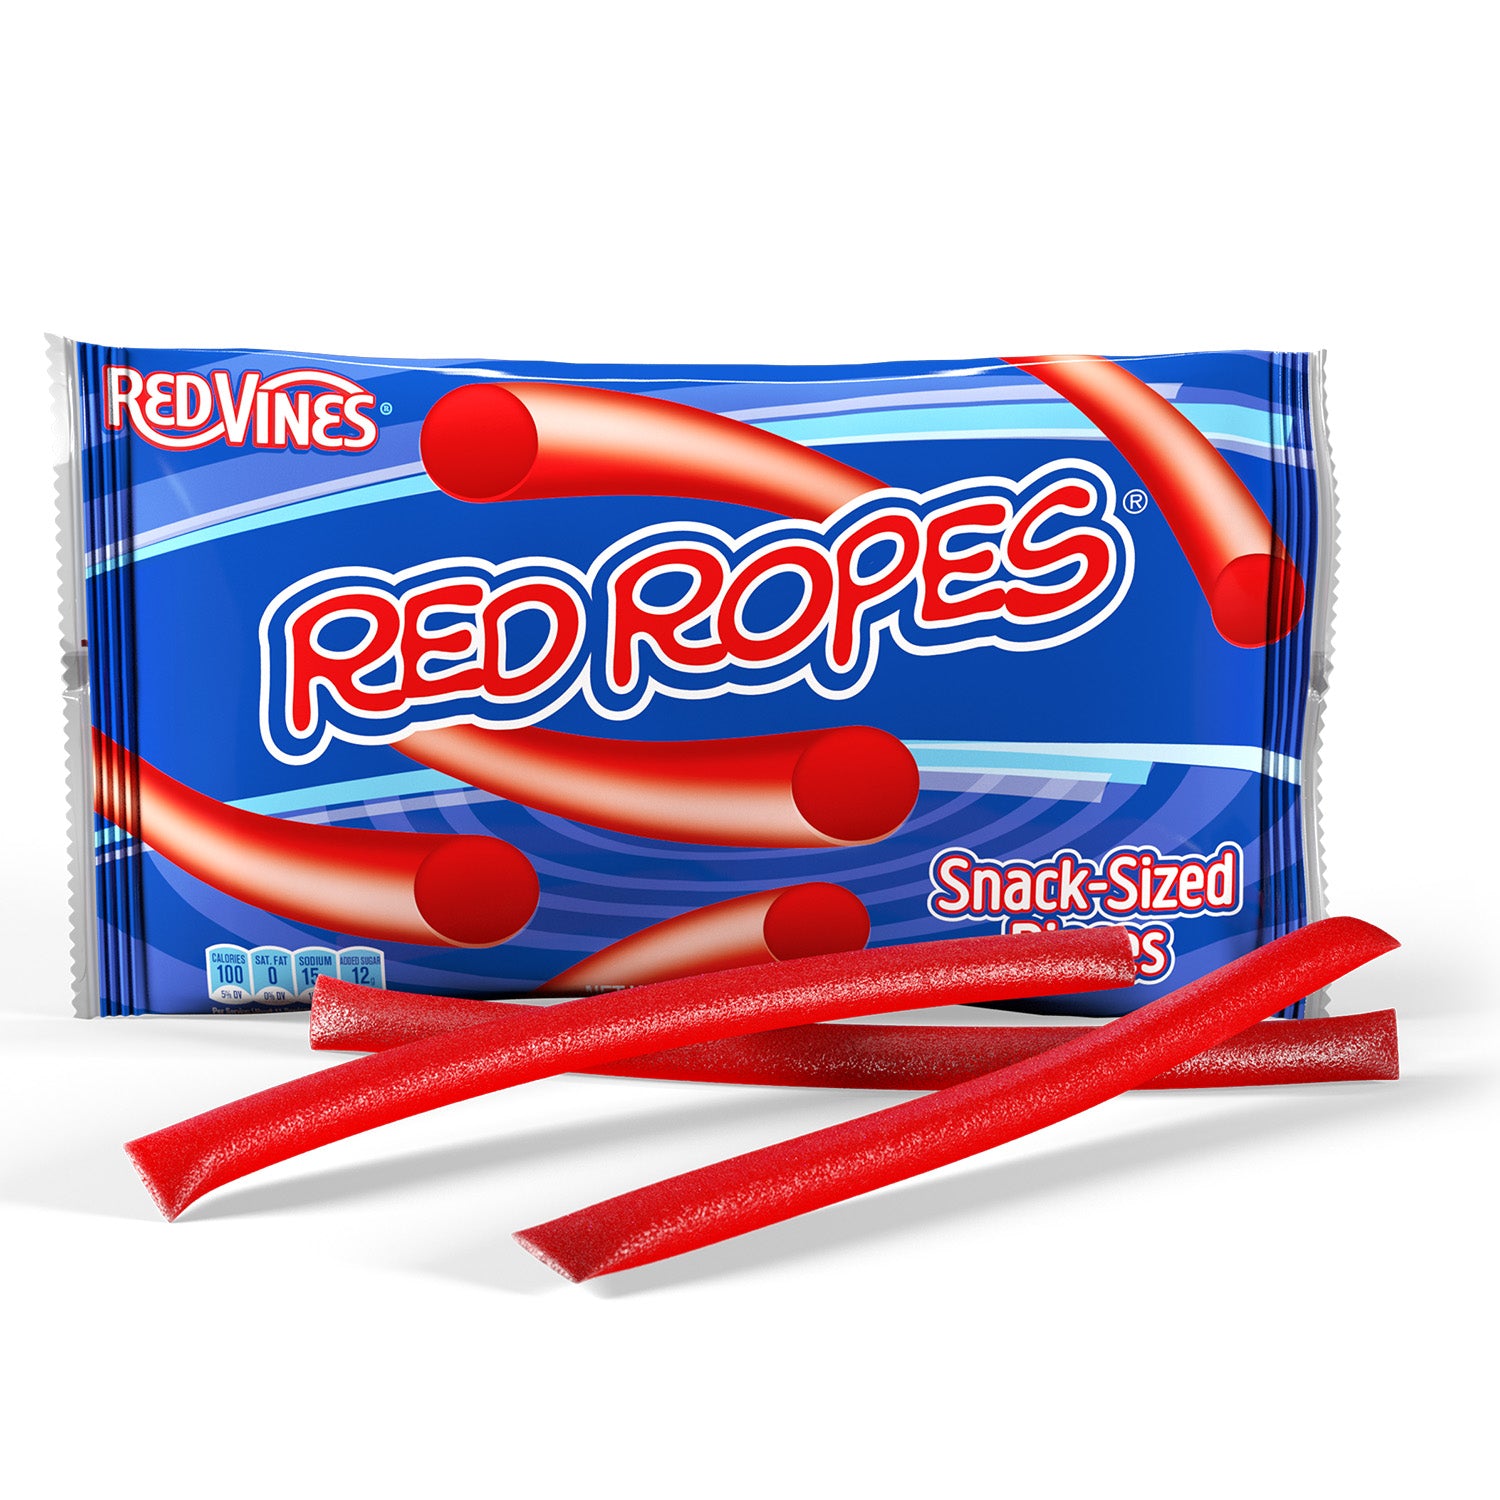 12oz RED VINES Red Ropes bag with Snack-Sized Licorice Pieces in front